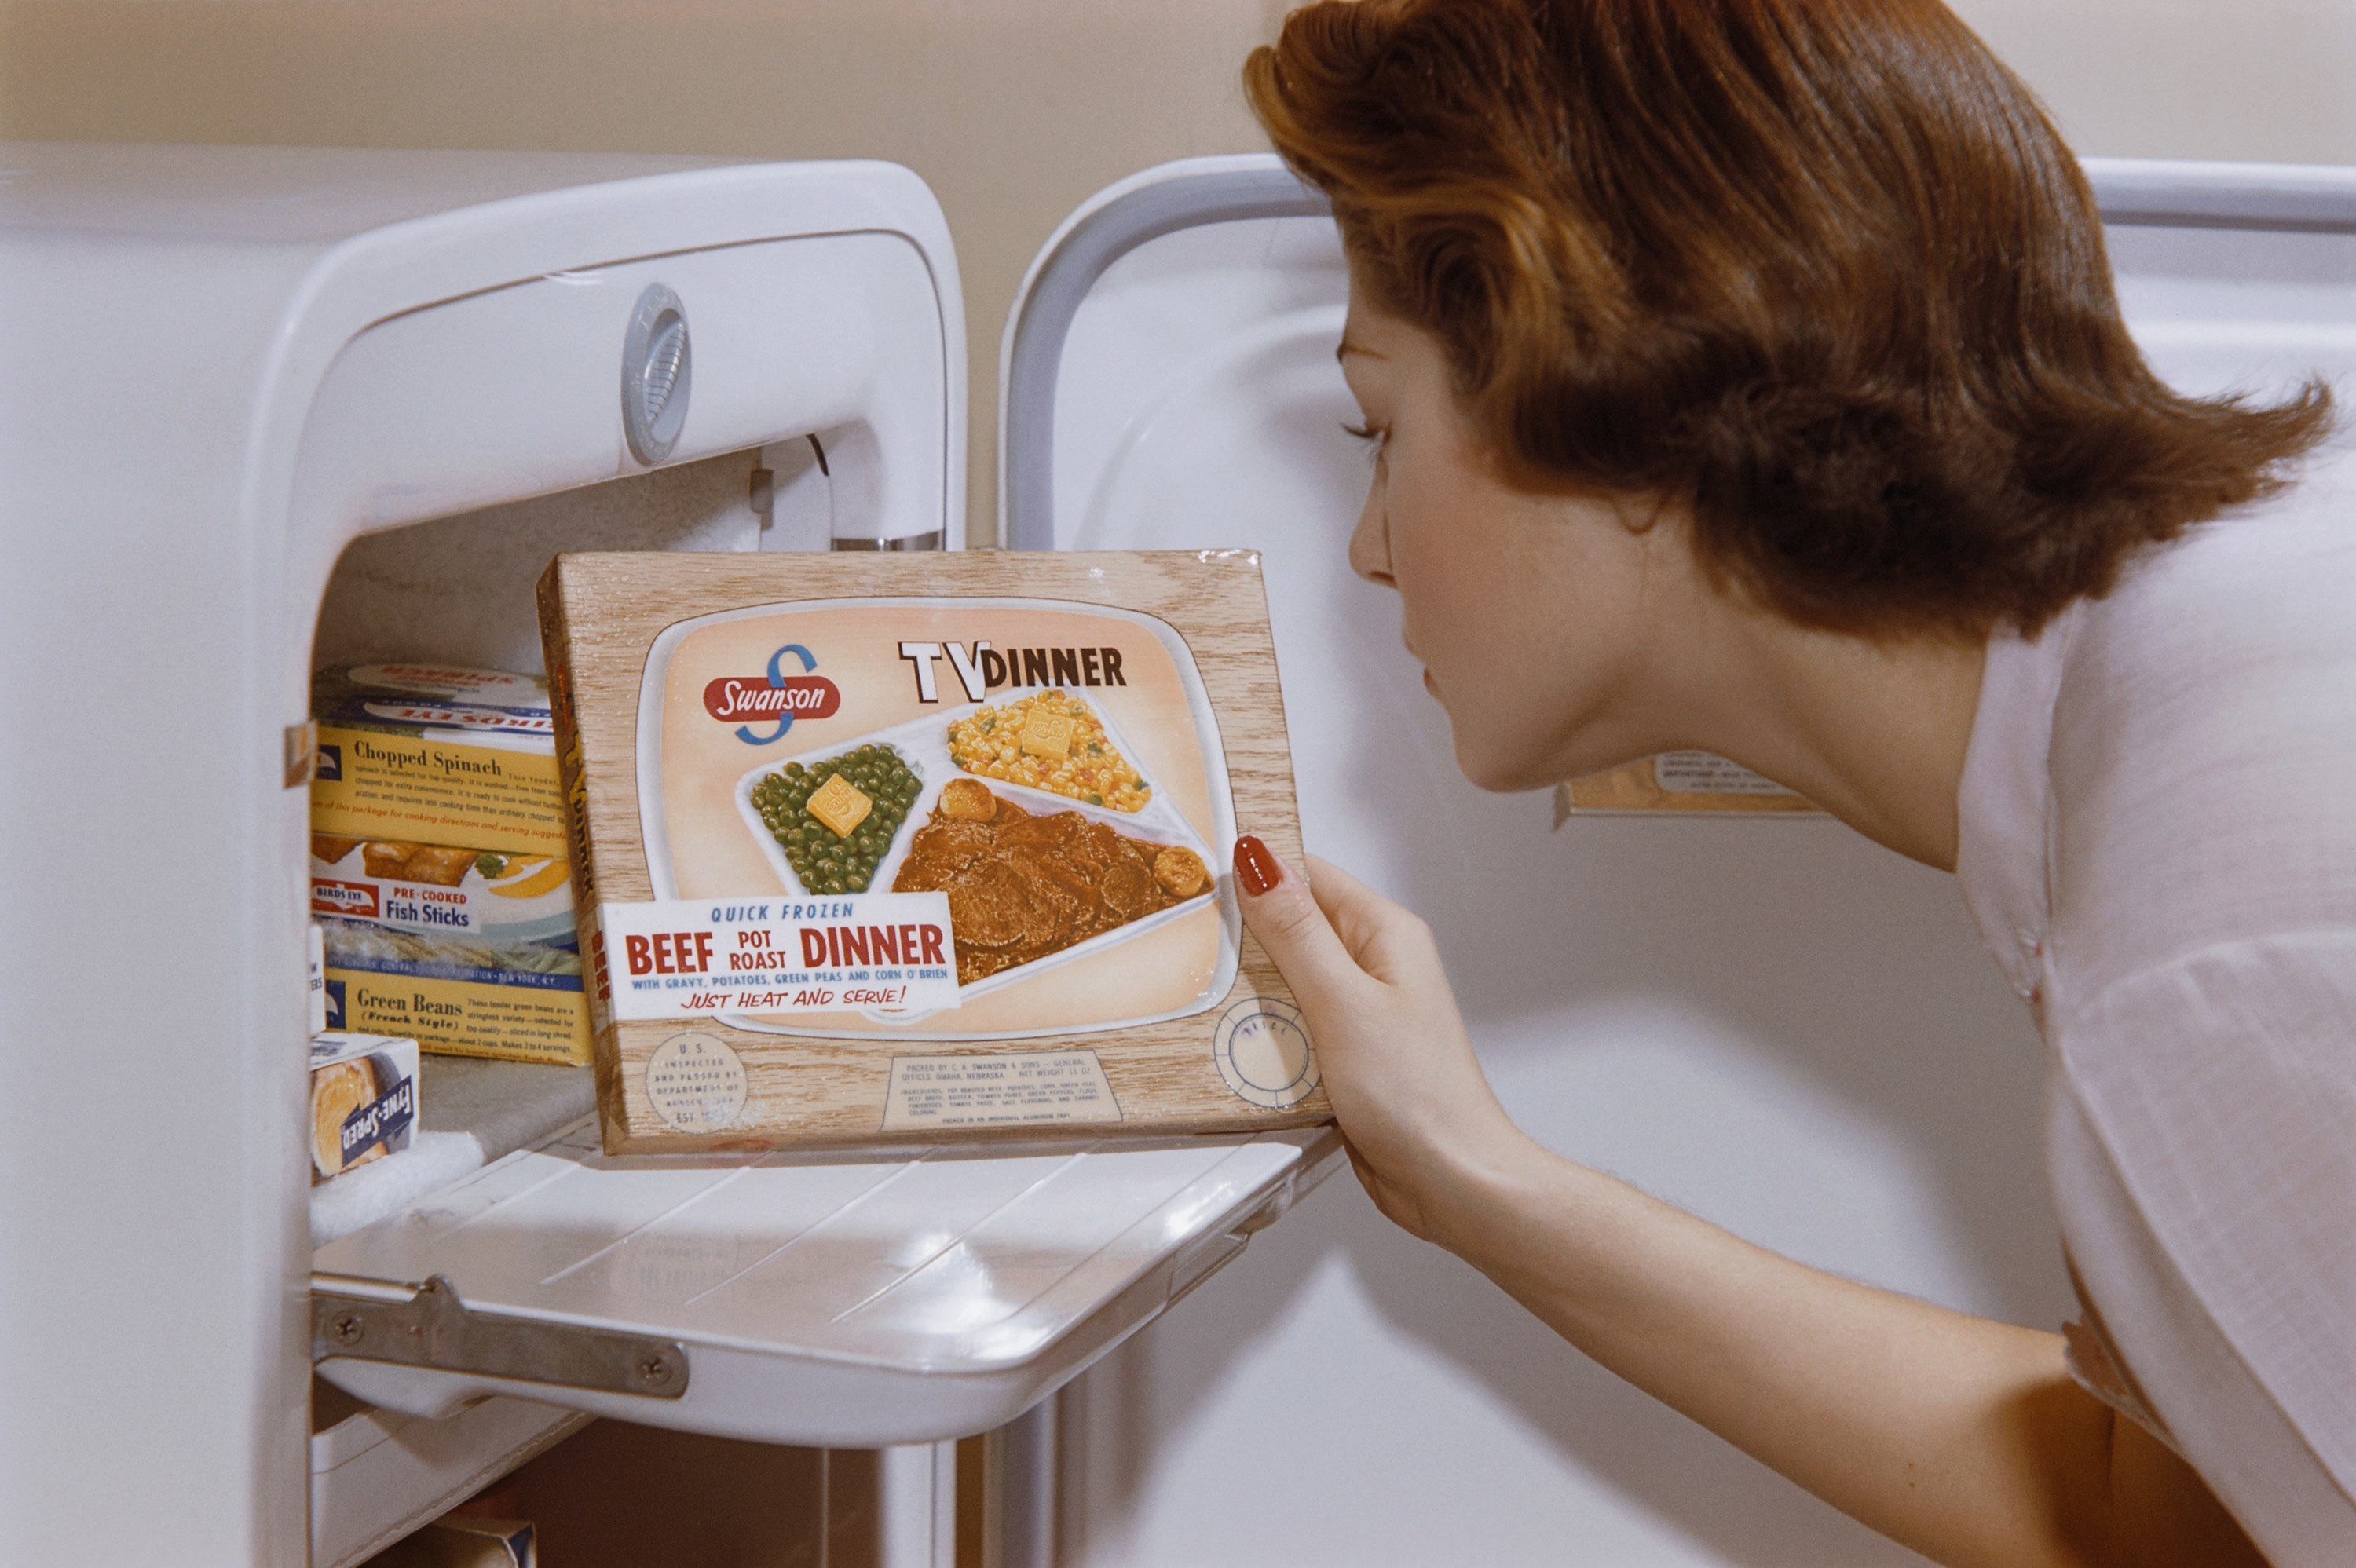 A color photo from the 1950s of a housewife opening her freezer and pulling out a Swanson TV Dinner